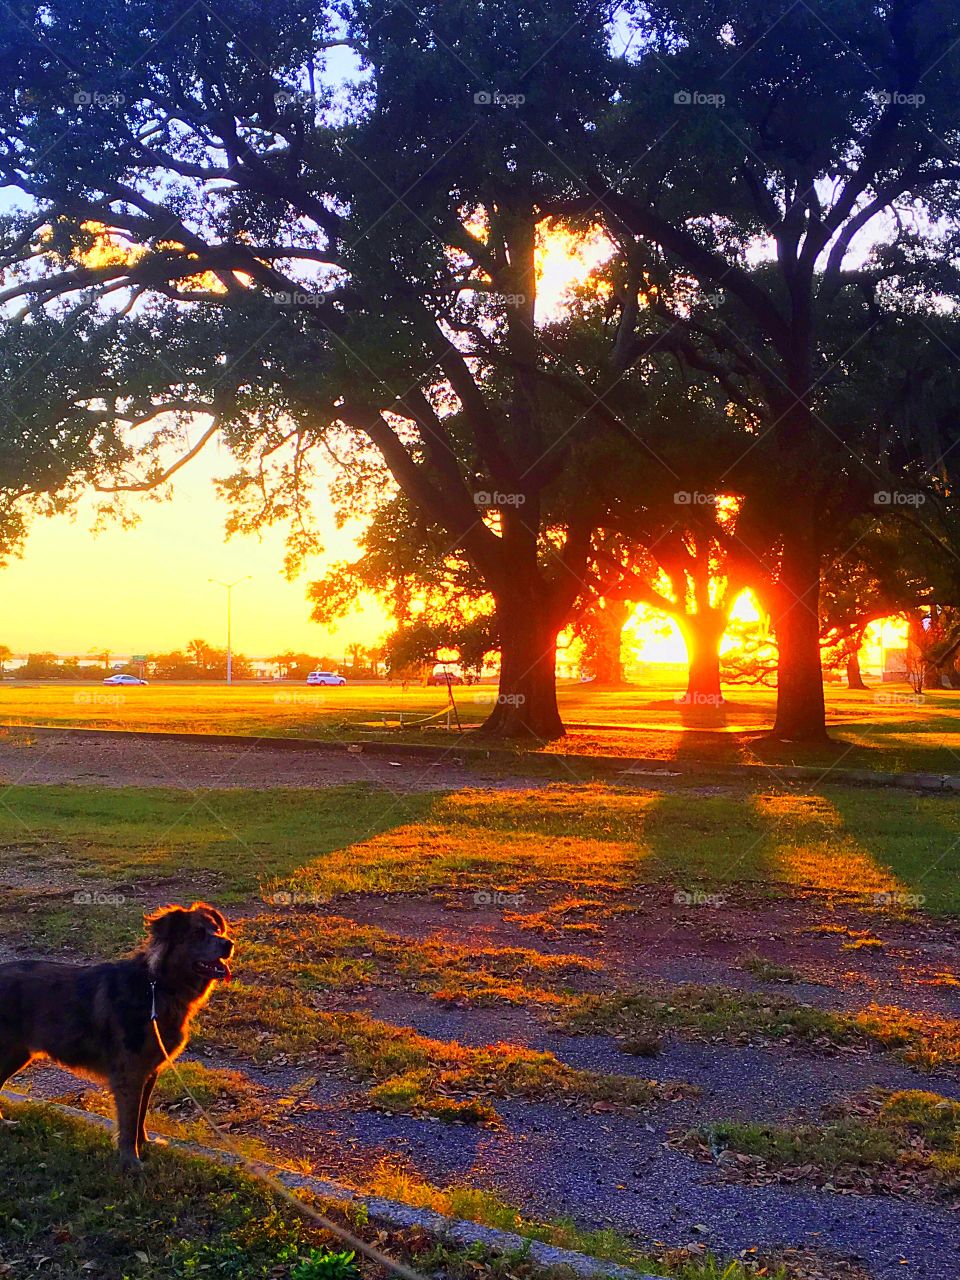 Southern living. Oak trees and pet dogs. 